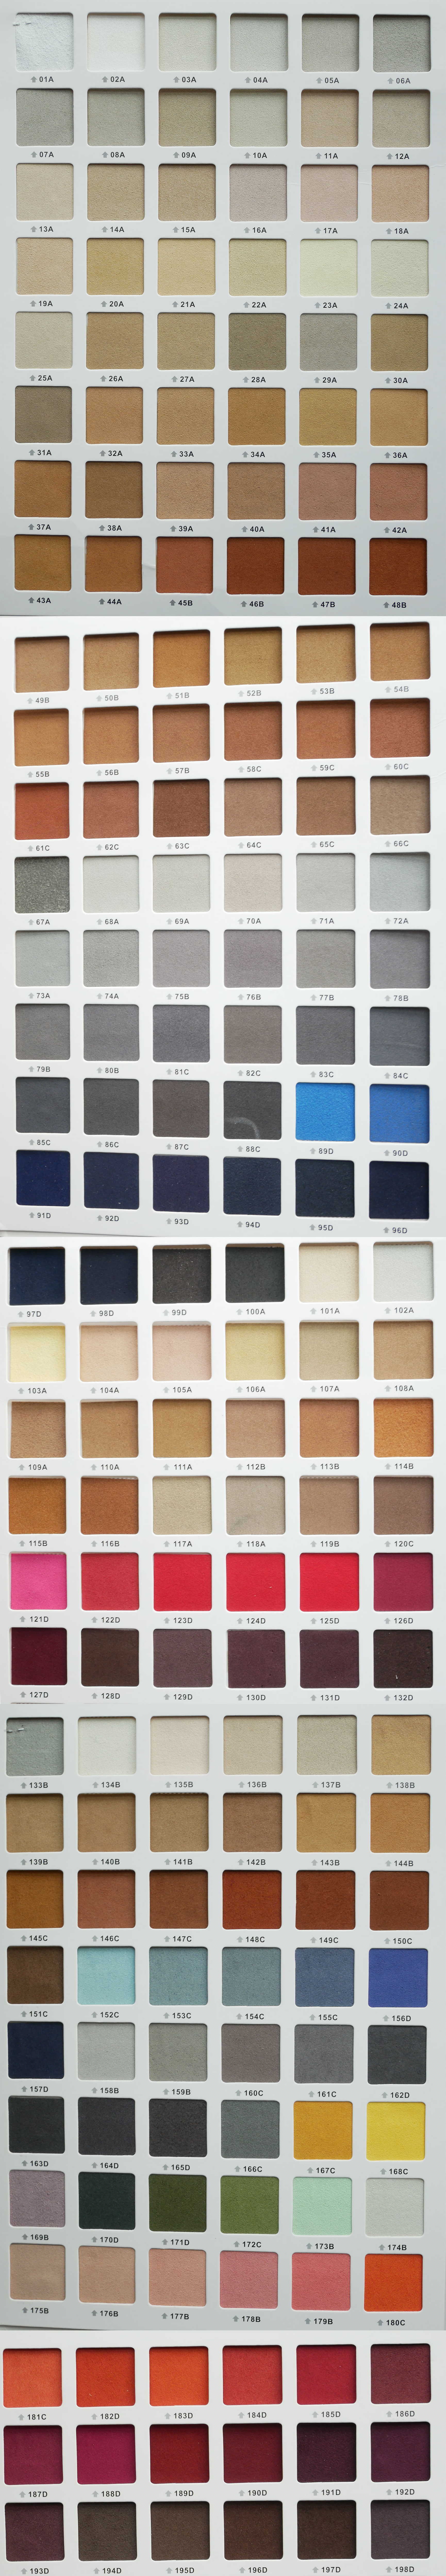 Suede Leather Fabric Color Chart